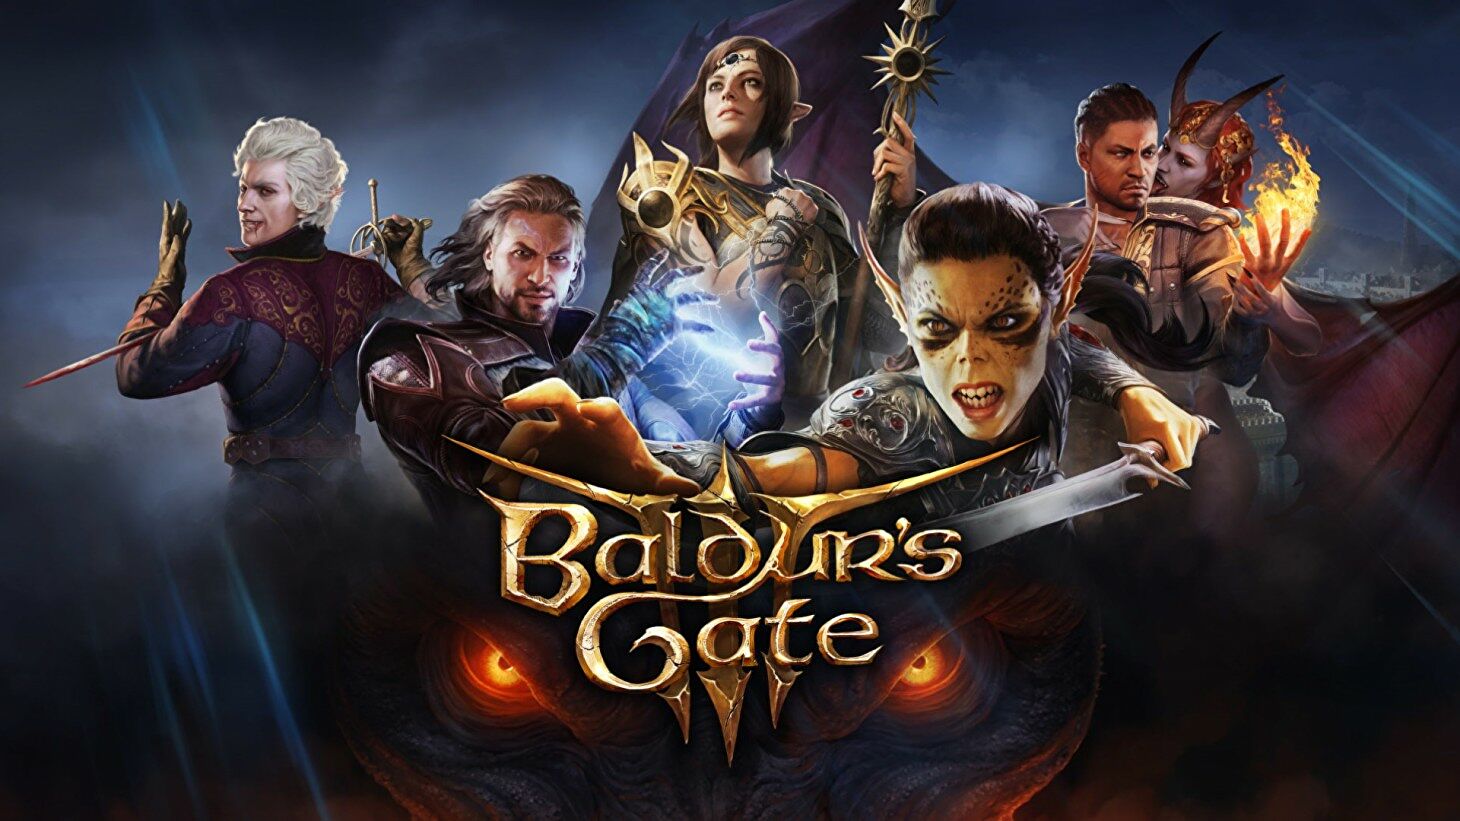 Baldur’s Gate 3 will not be affected by DnD licensing changes